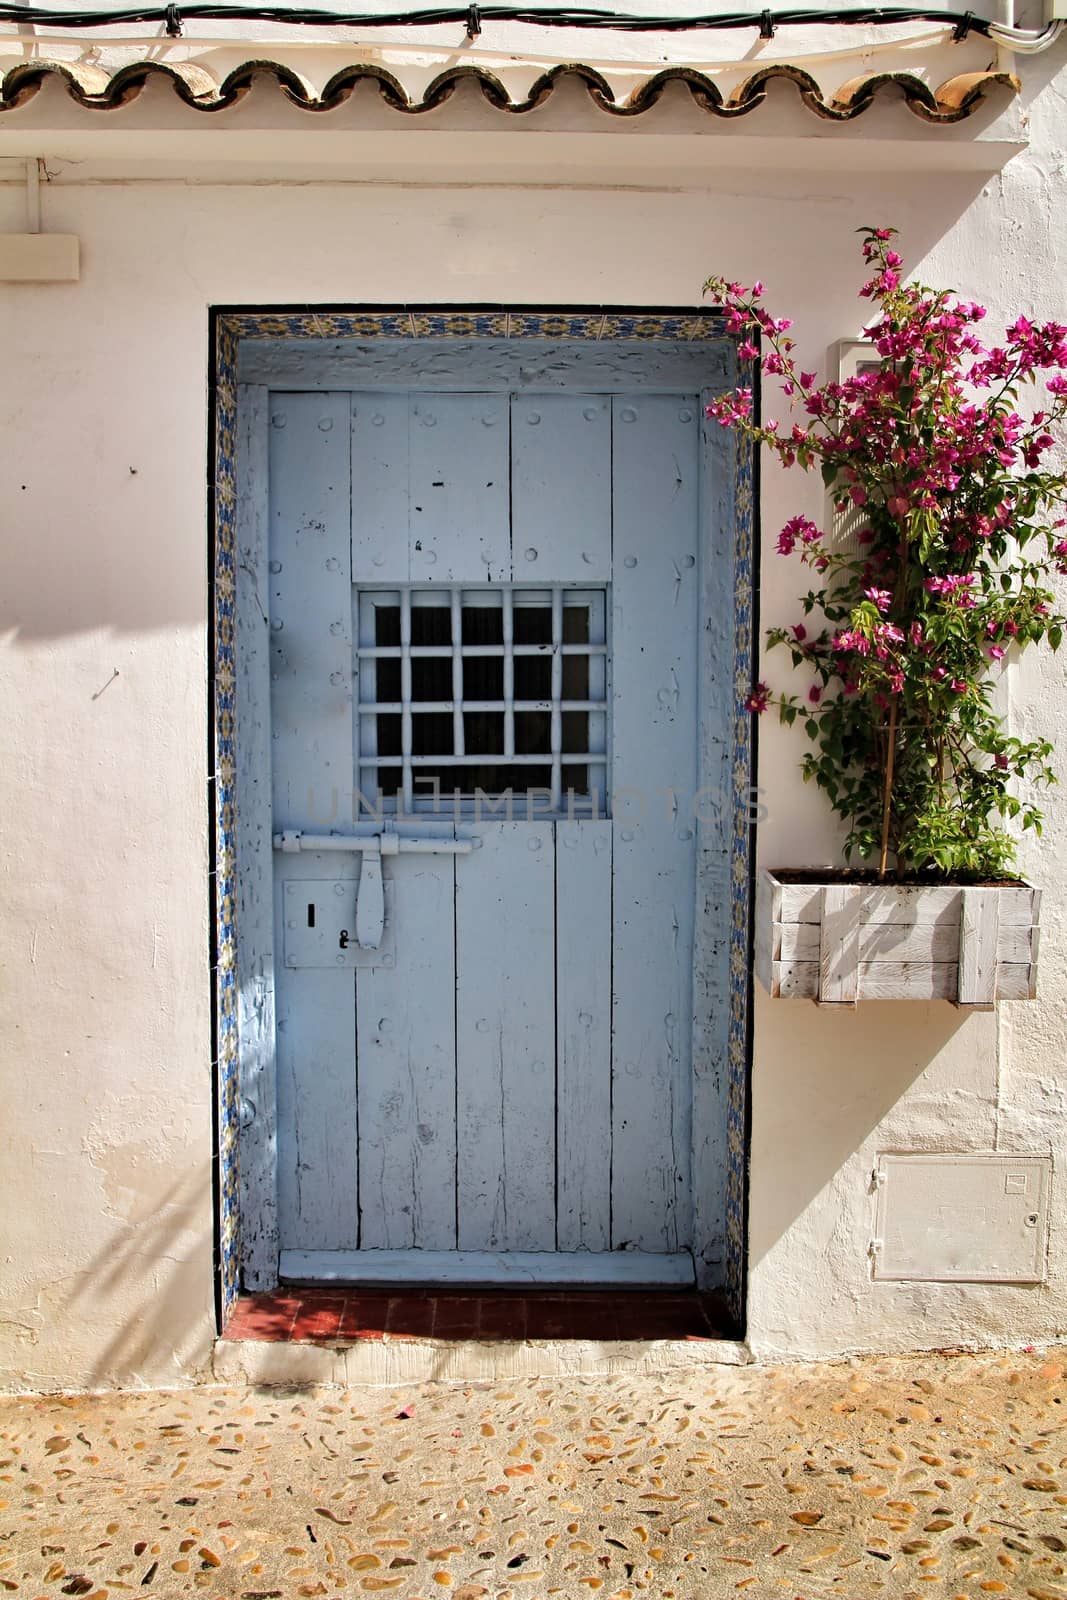 Old and colorful blue wooden door with iron details in Altea, Alicante, Spain